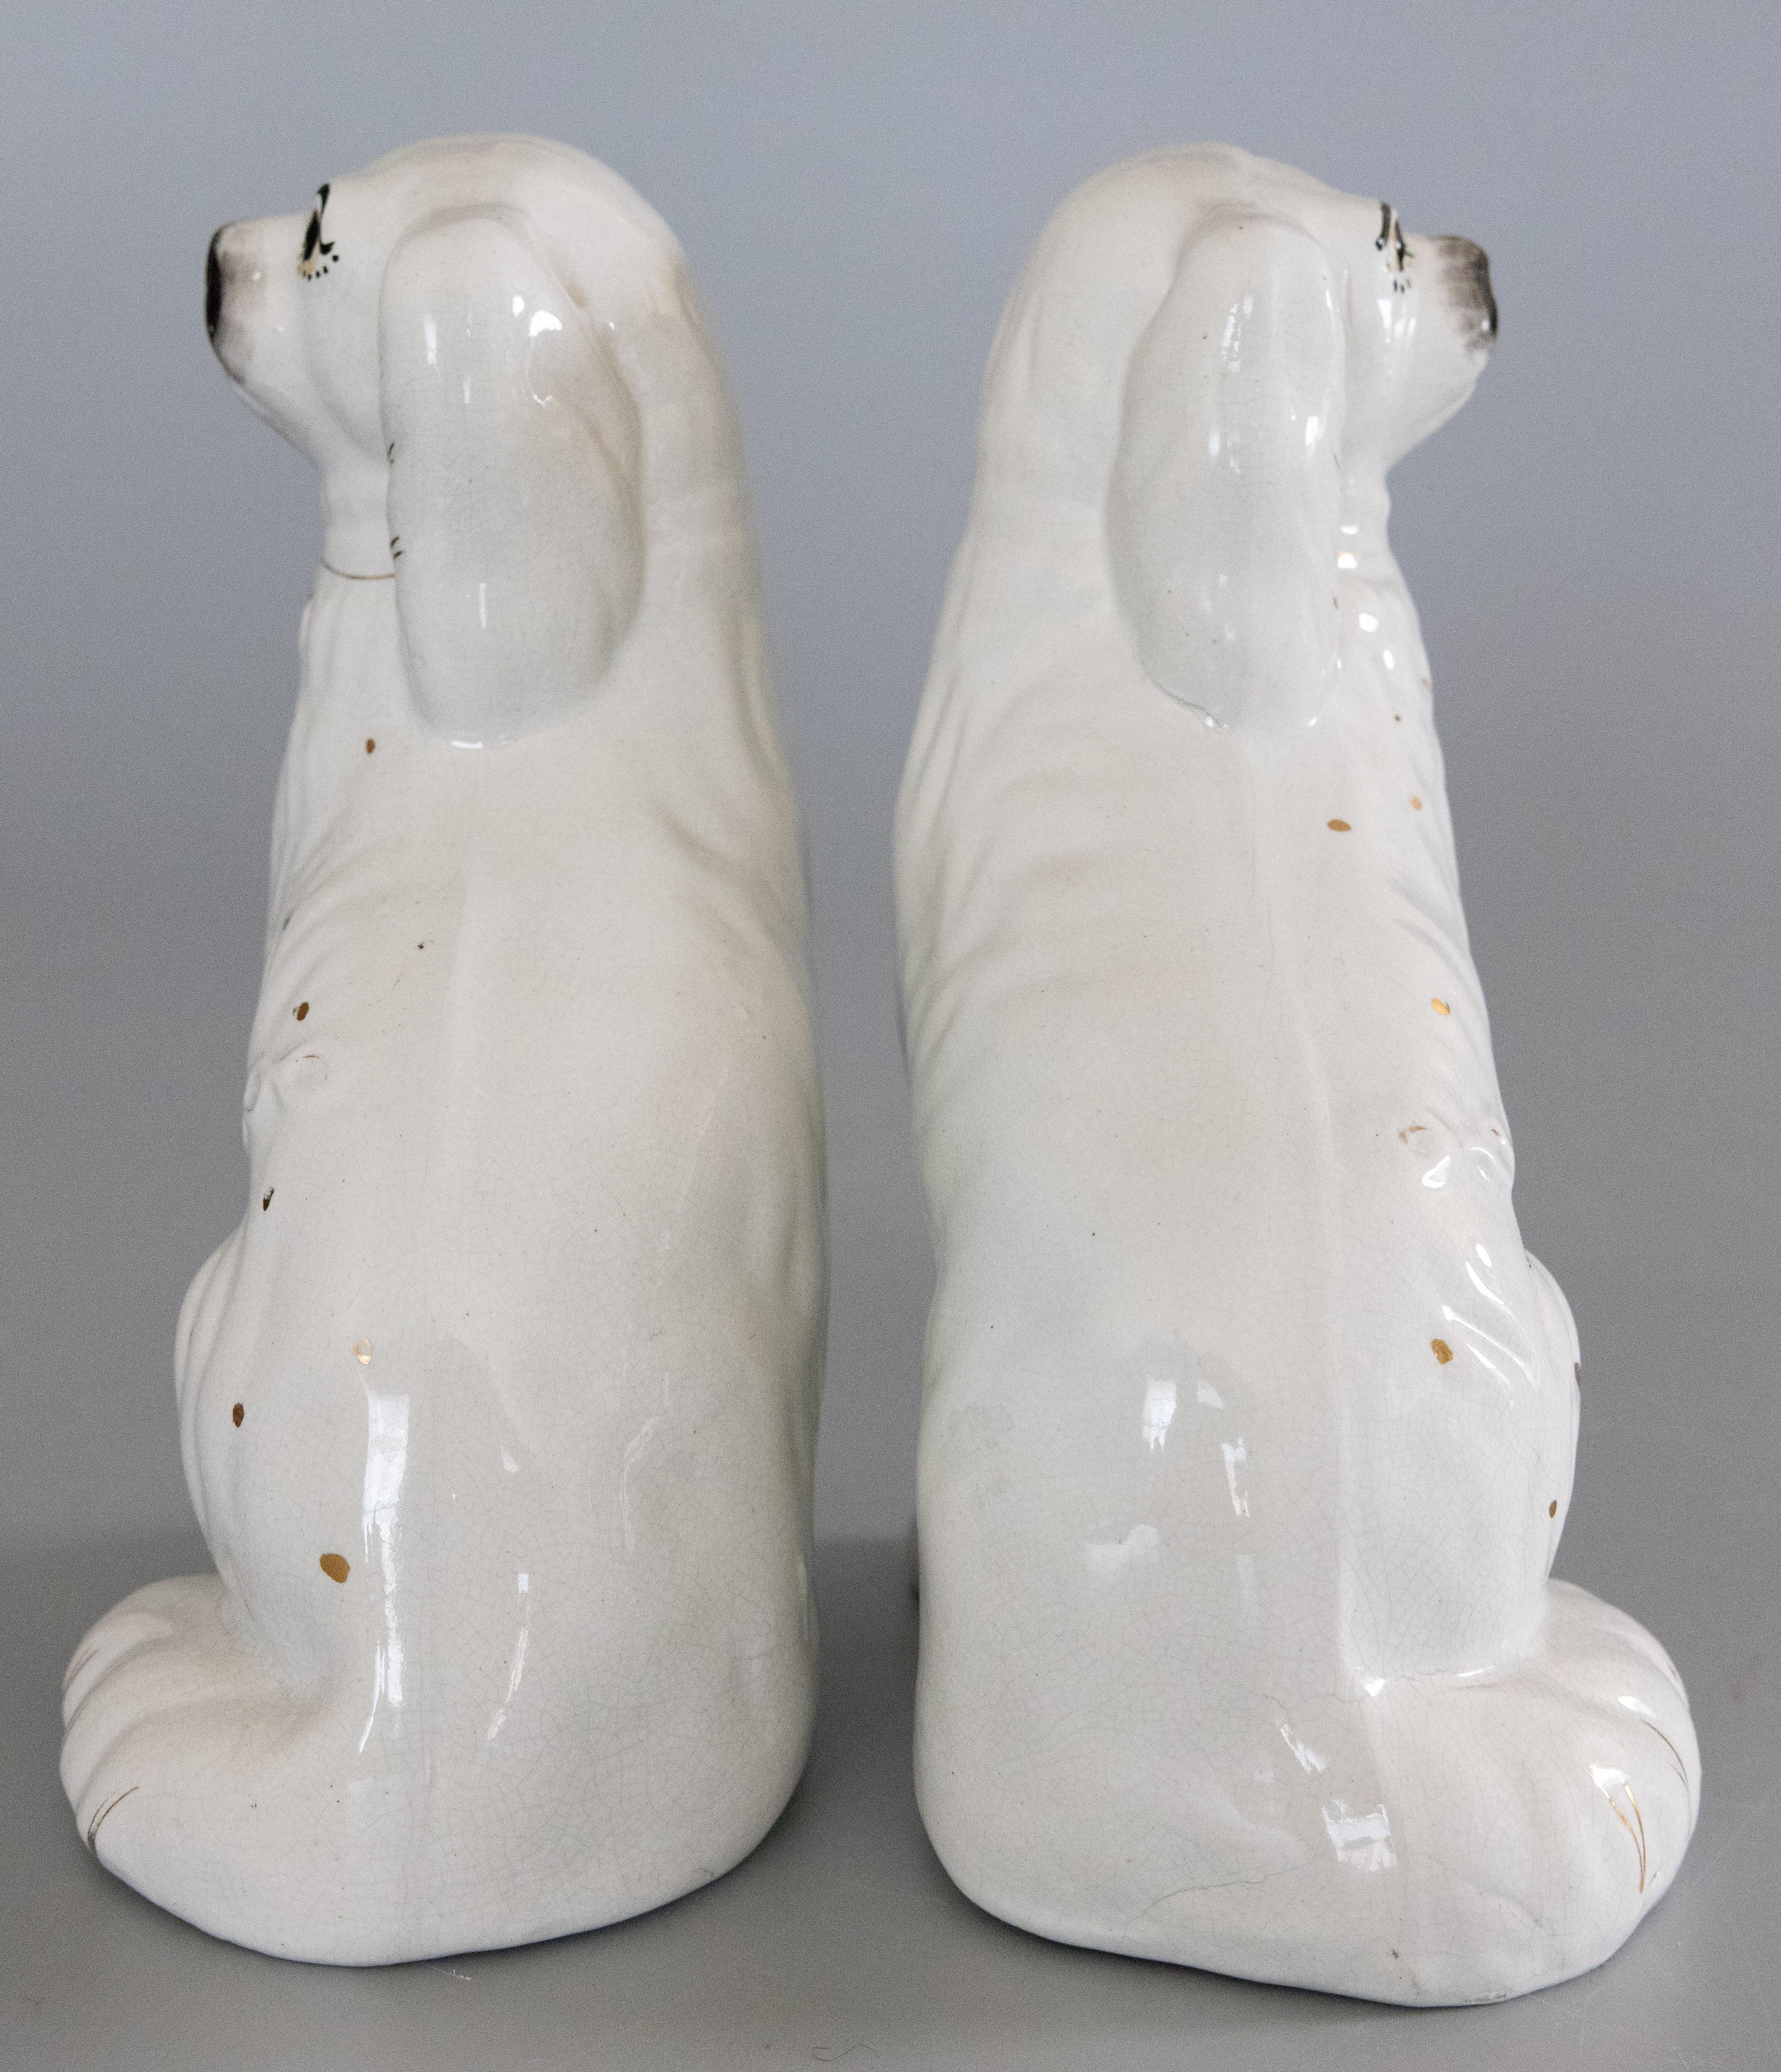 Ceramic Pair of 19th Century English Staffordshire Spaniel Dogs Figurines For Sale